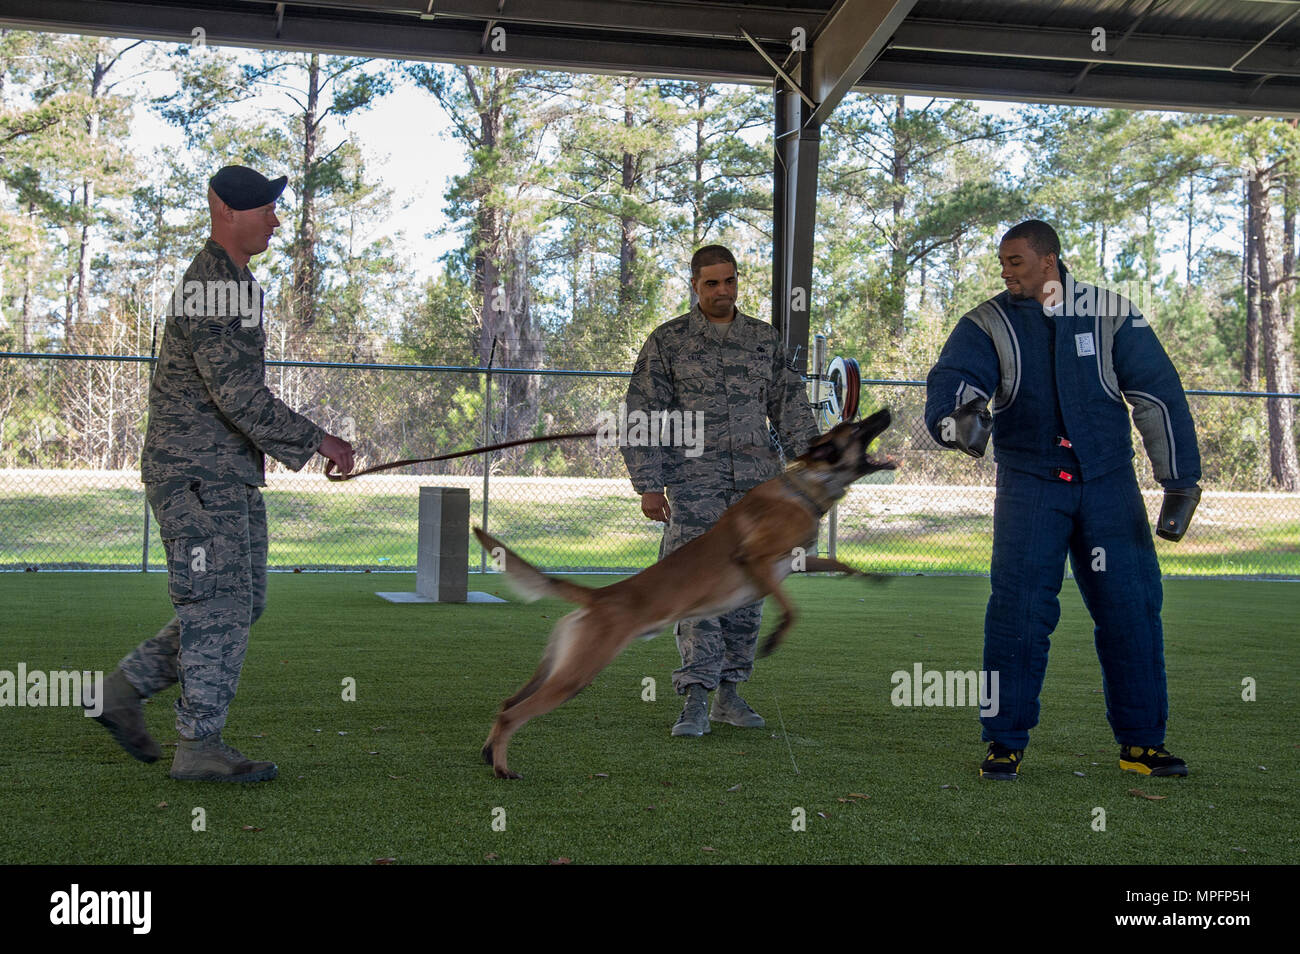 Malcolm Mitchell, right, New England Patriots’ wide receiver and Super Bowl LI Champion, gets attacked by MWD Ttoby during a visit March 7, 2017, at Moody Air Force Base, Ga. Mitchell, who is a Valdosta native, got a glimpse of a typical day in the life of some of Moody’s Airmen from the 23d Fighter Group, 23d Maintenance Group, 23d Mission Support Group, and the 820th Base Defense Group. During his visit, Mitchell also spent time with Airmen and signed autographs for local Patriots fans. (U.S. Air Force photo by Senior Airman Ceaira Young) Stock Photo